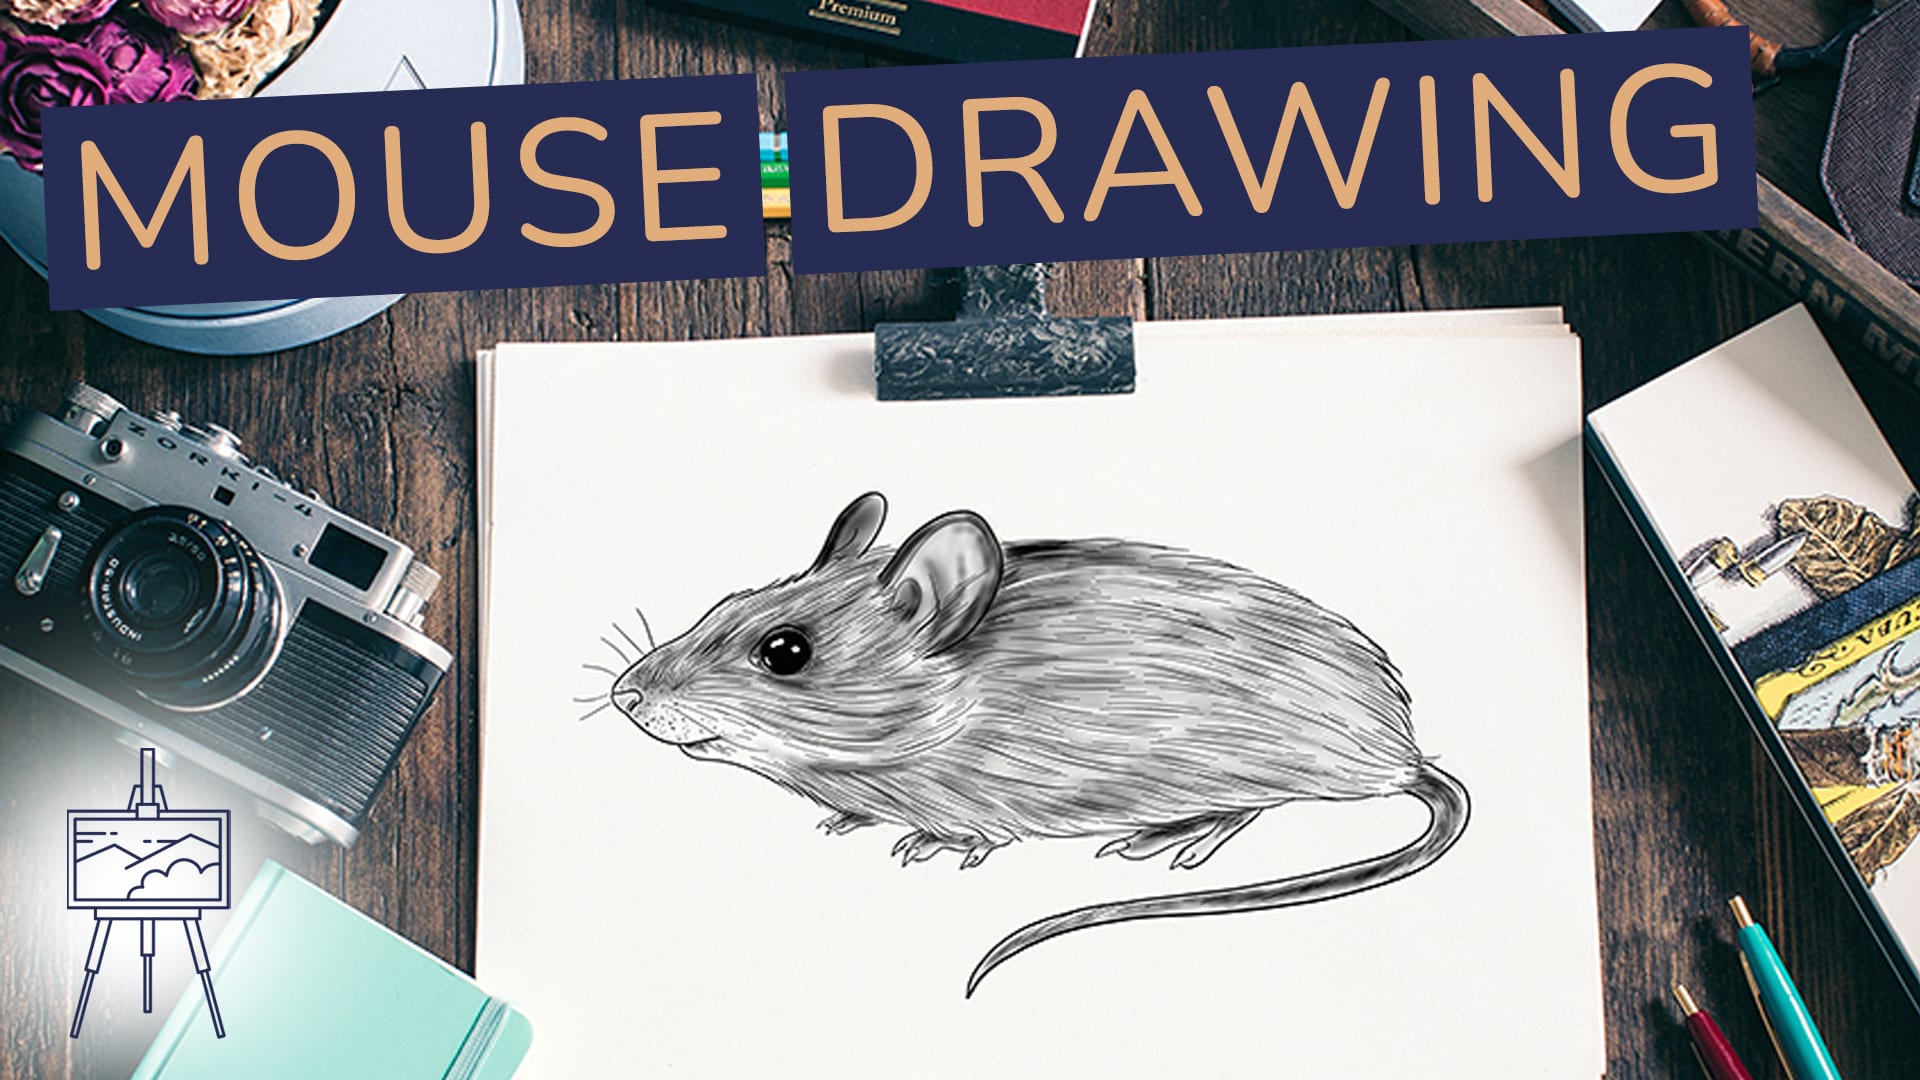 90380 Mouse Drawing Images Stock Photos  Vectors  Shutterstock